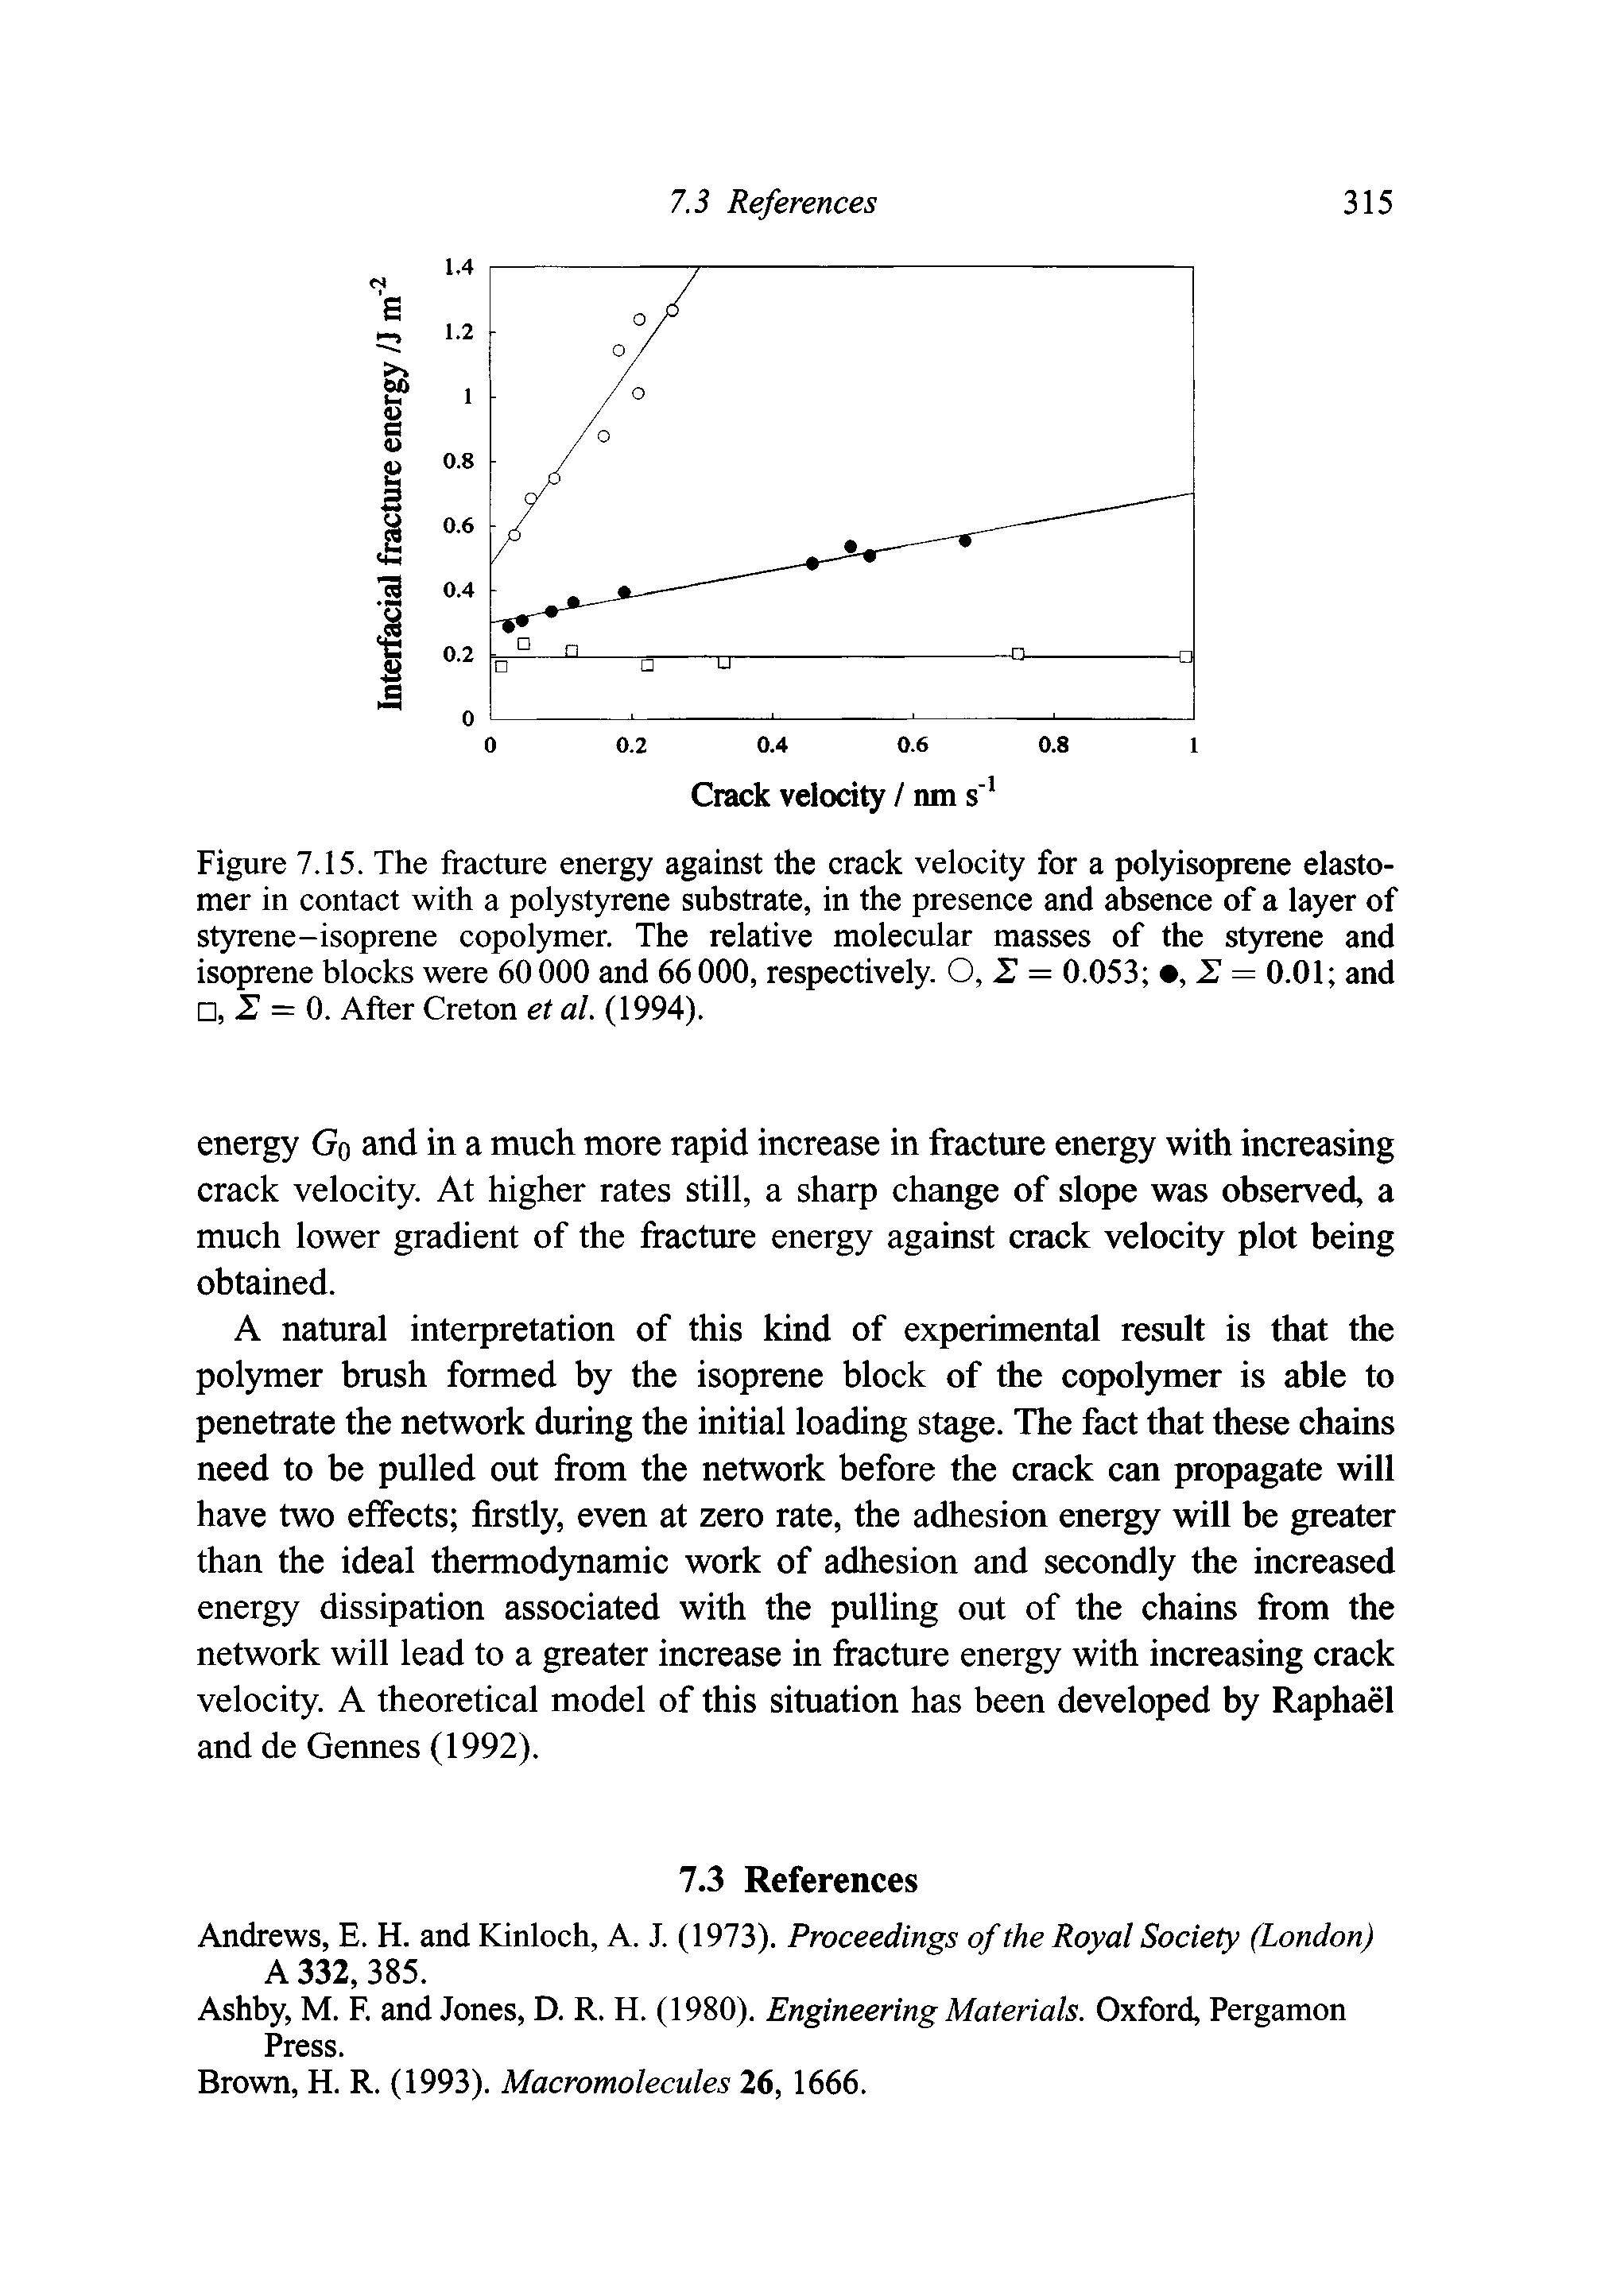 Figure 7.15. The fracture energy against the crack velocity for a polyisoprene elastomer in contact with a polystyrene substrate, in the presence and absence of a layer of styrene-isoprene copolymer. The relative molecular masses of the styrene and isoprene blocks were 60 000 and 66 000, respectively. 0,11 = 0.053 , 2 = 0.01 and , 2 = 0. After Creton et al. (1994).